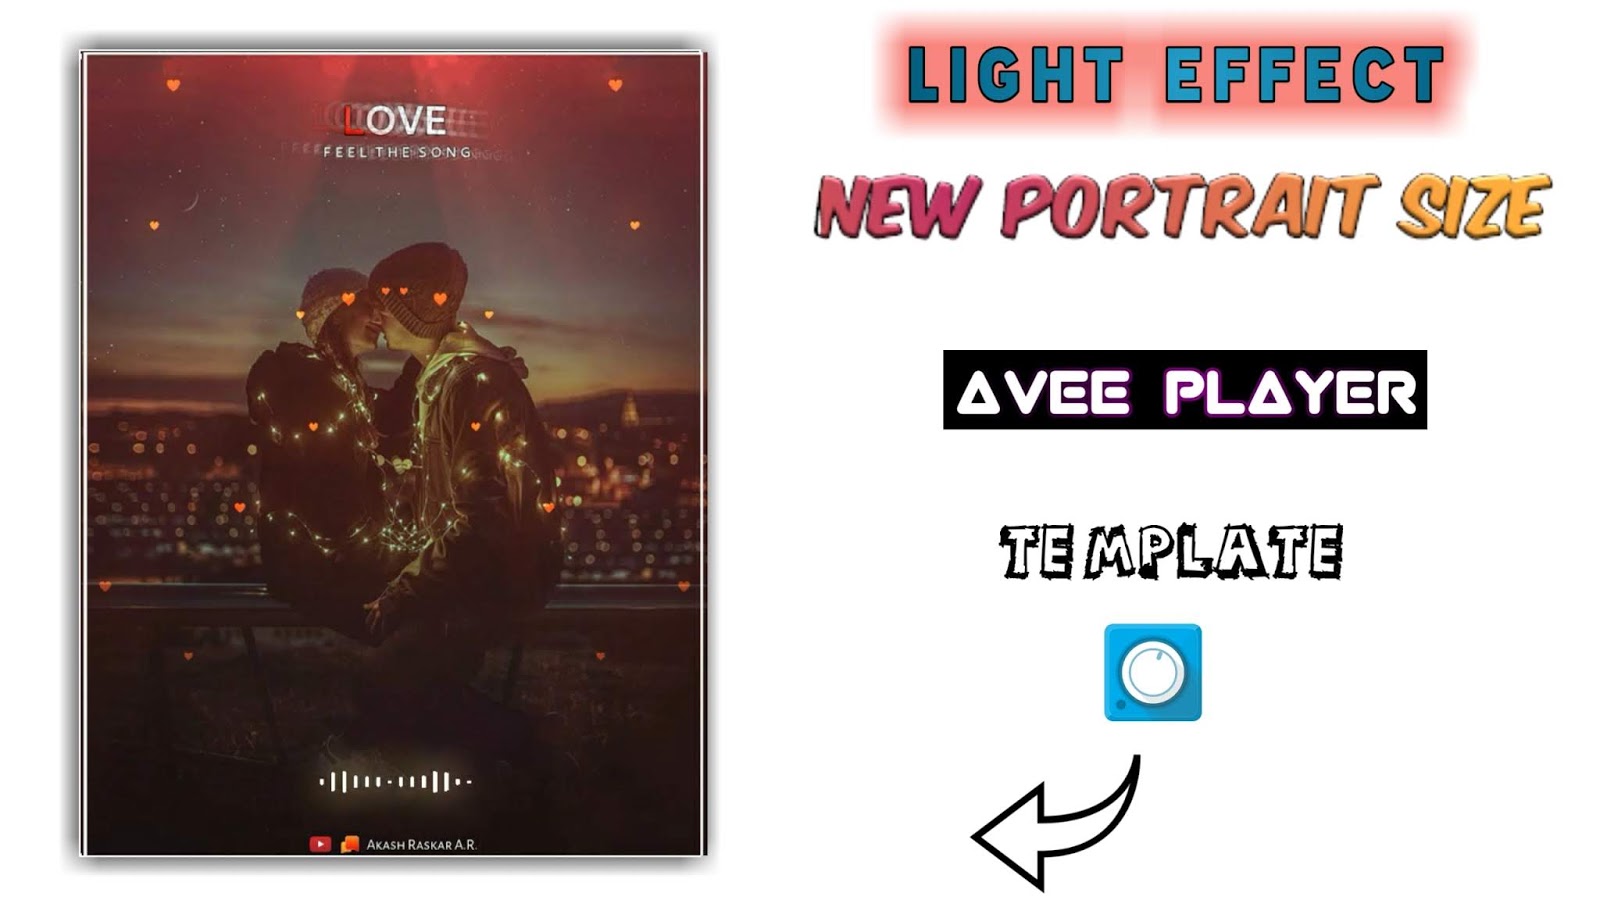 Avee player template